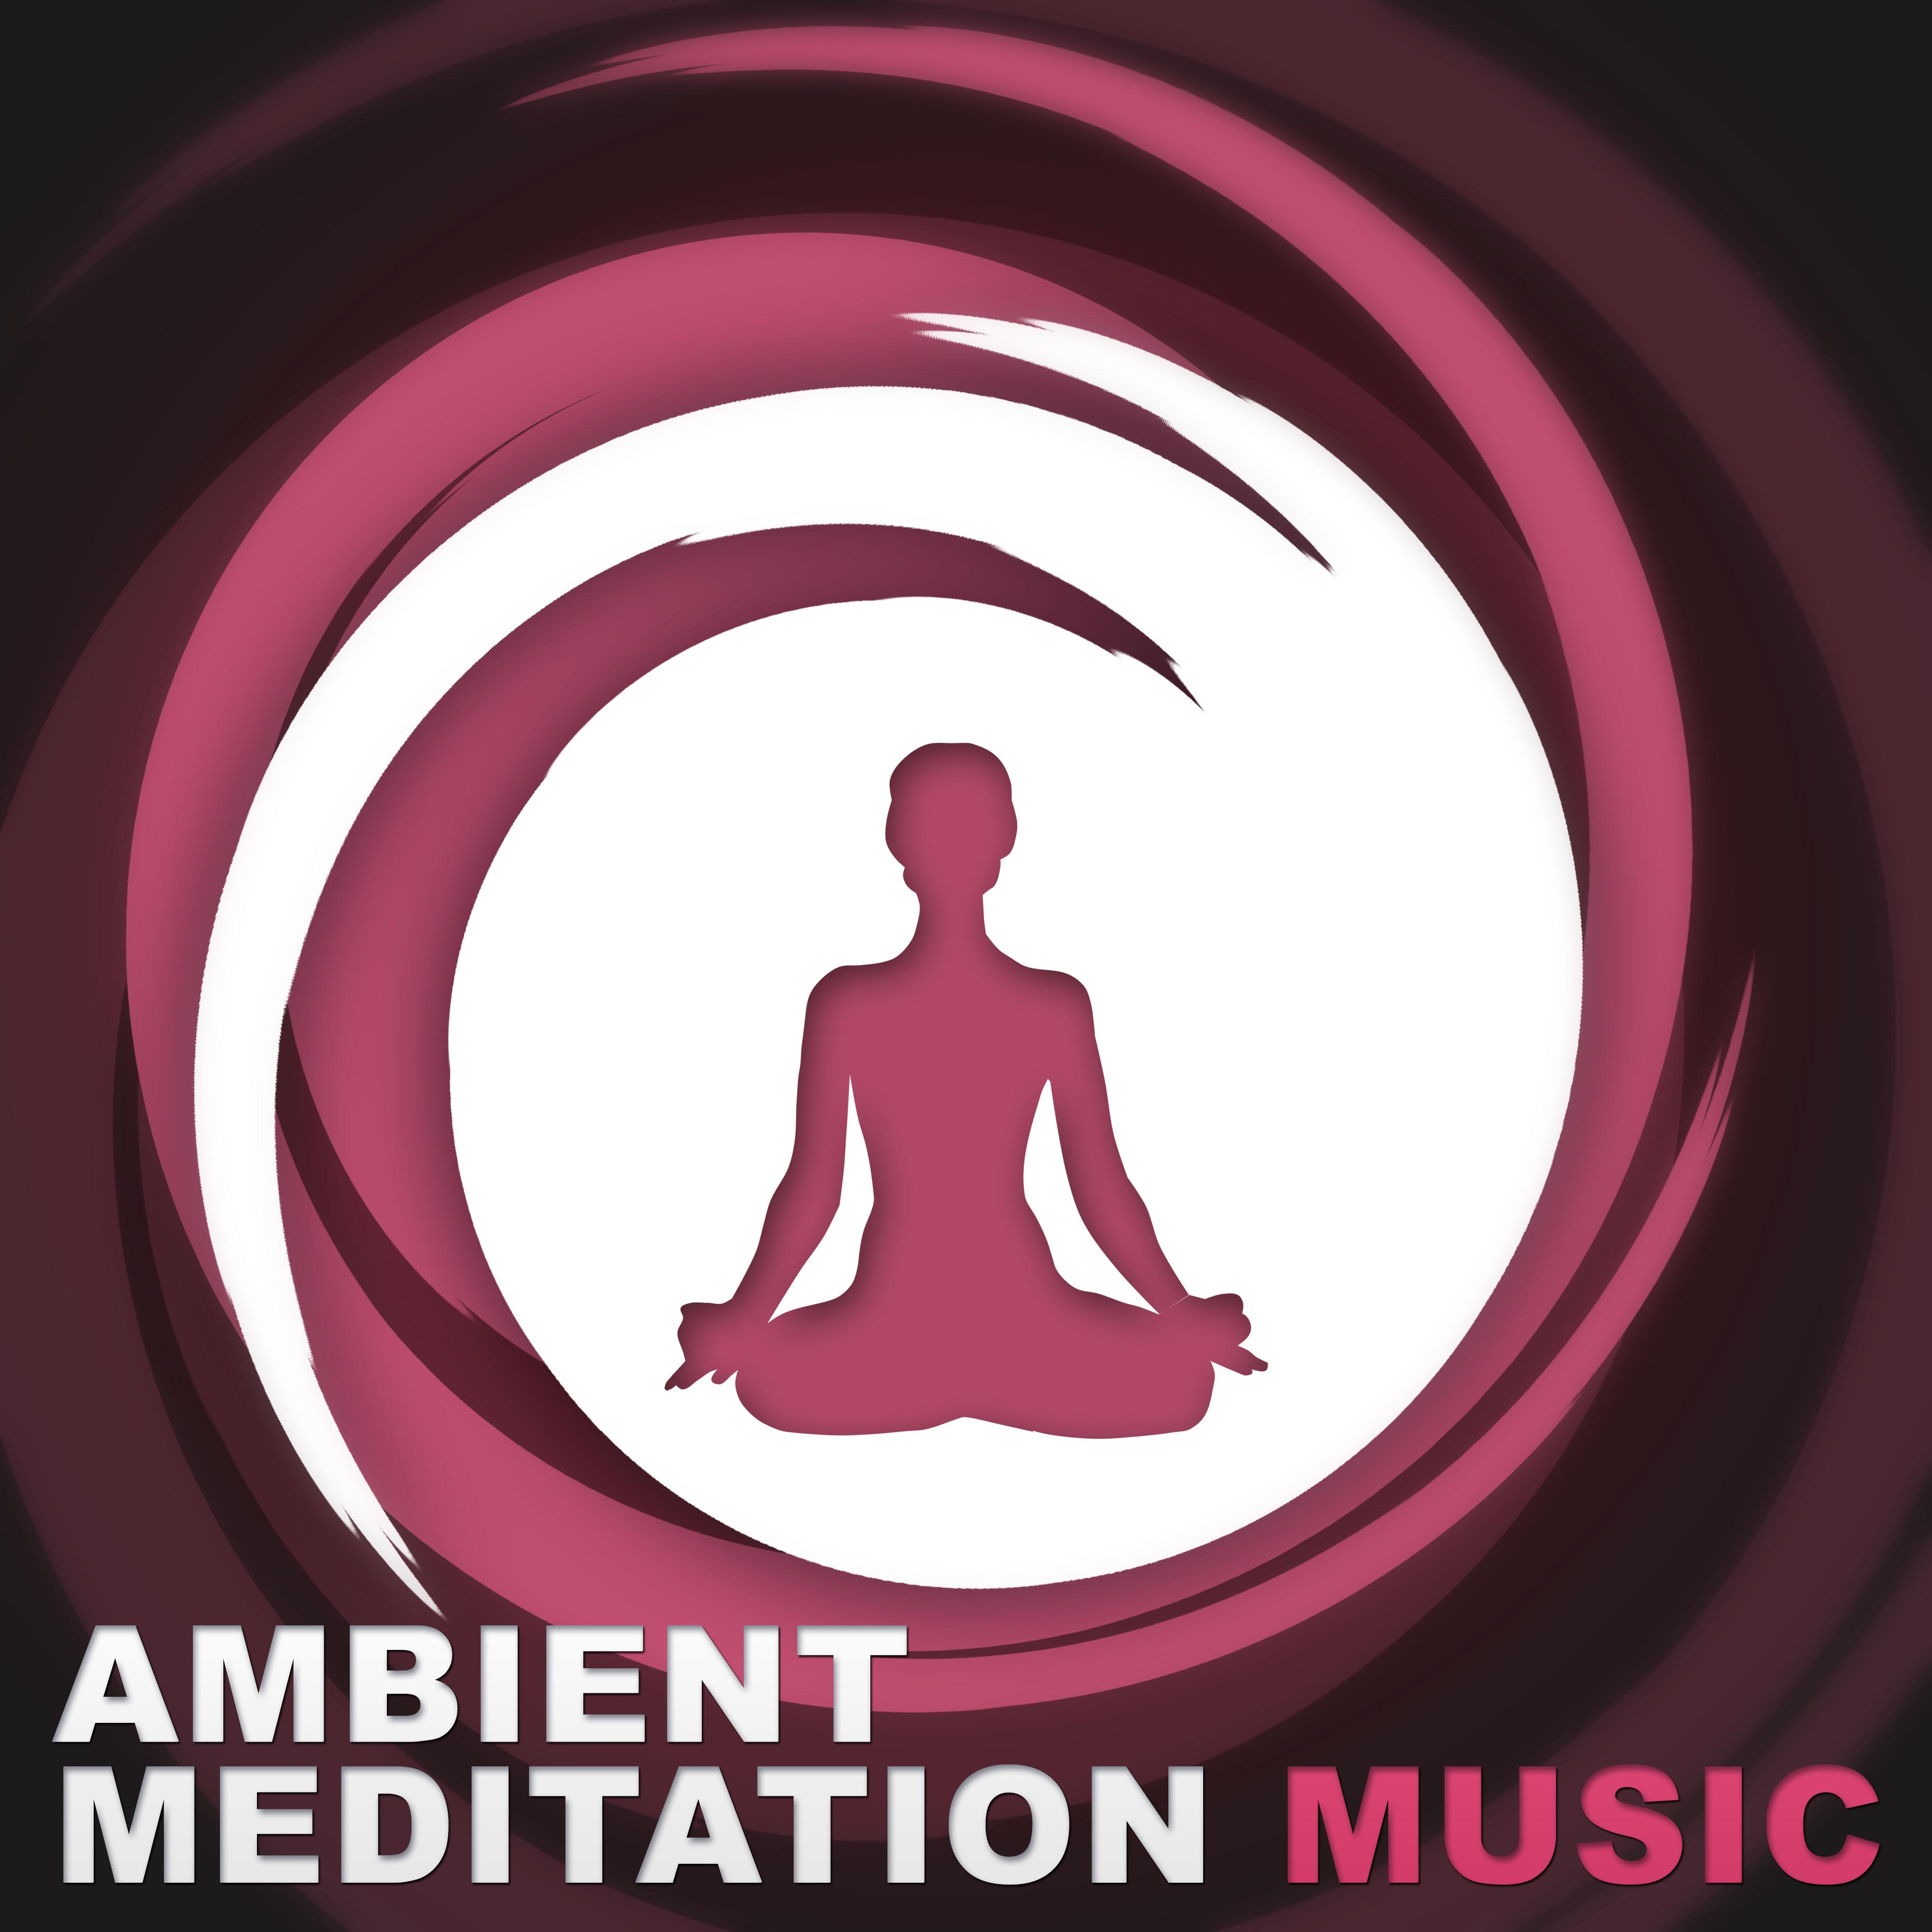 Ambient Meditation Music  Sounds of Healing Nature to Deep Meditation, Feel Pure Relaxation, Yoga Music, Sound Therapy